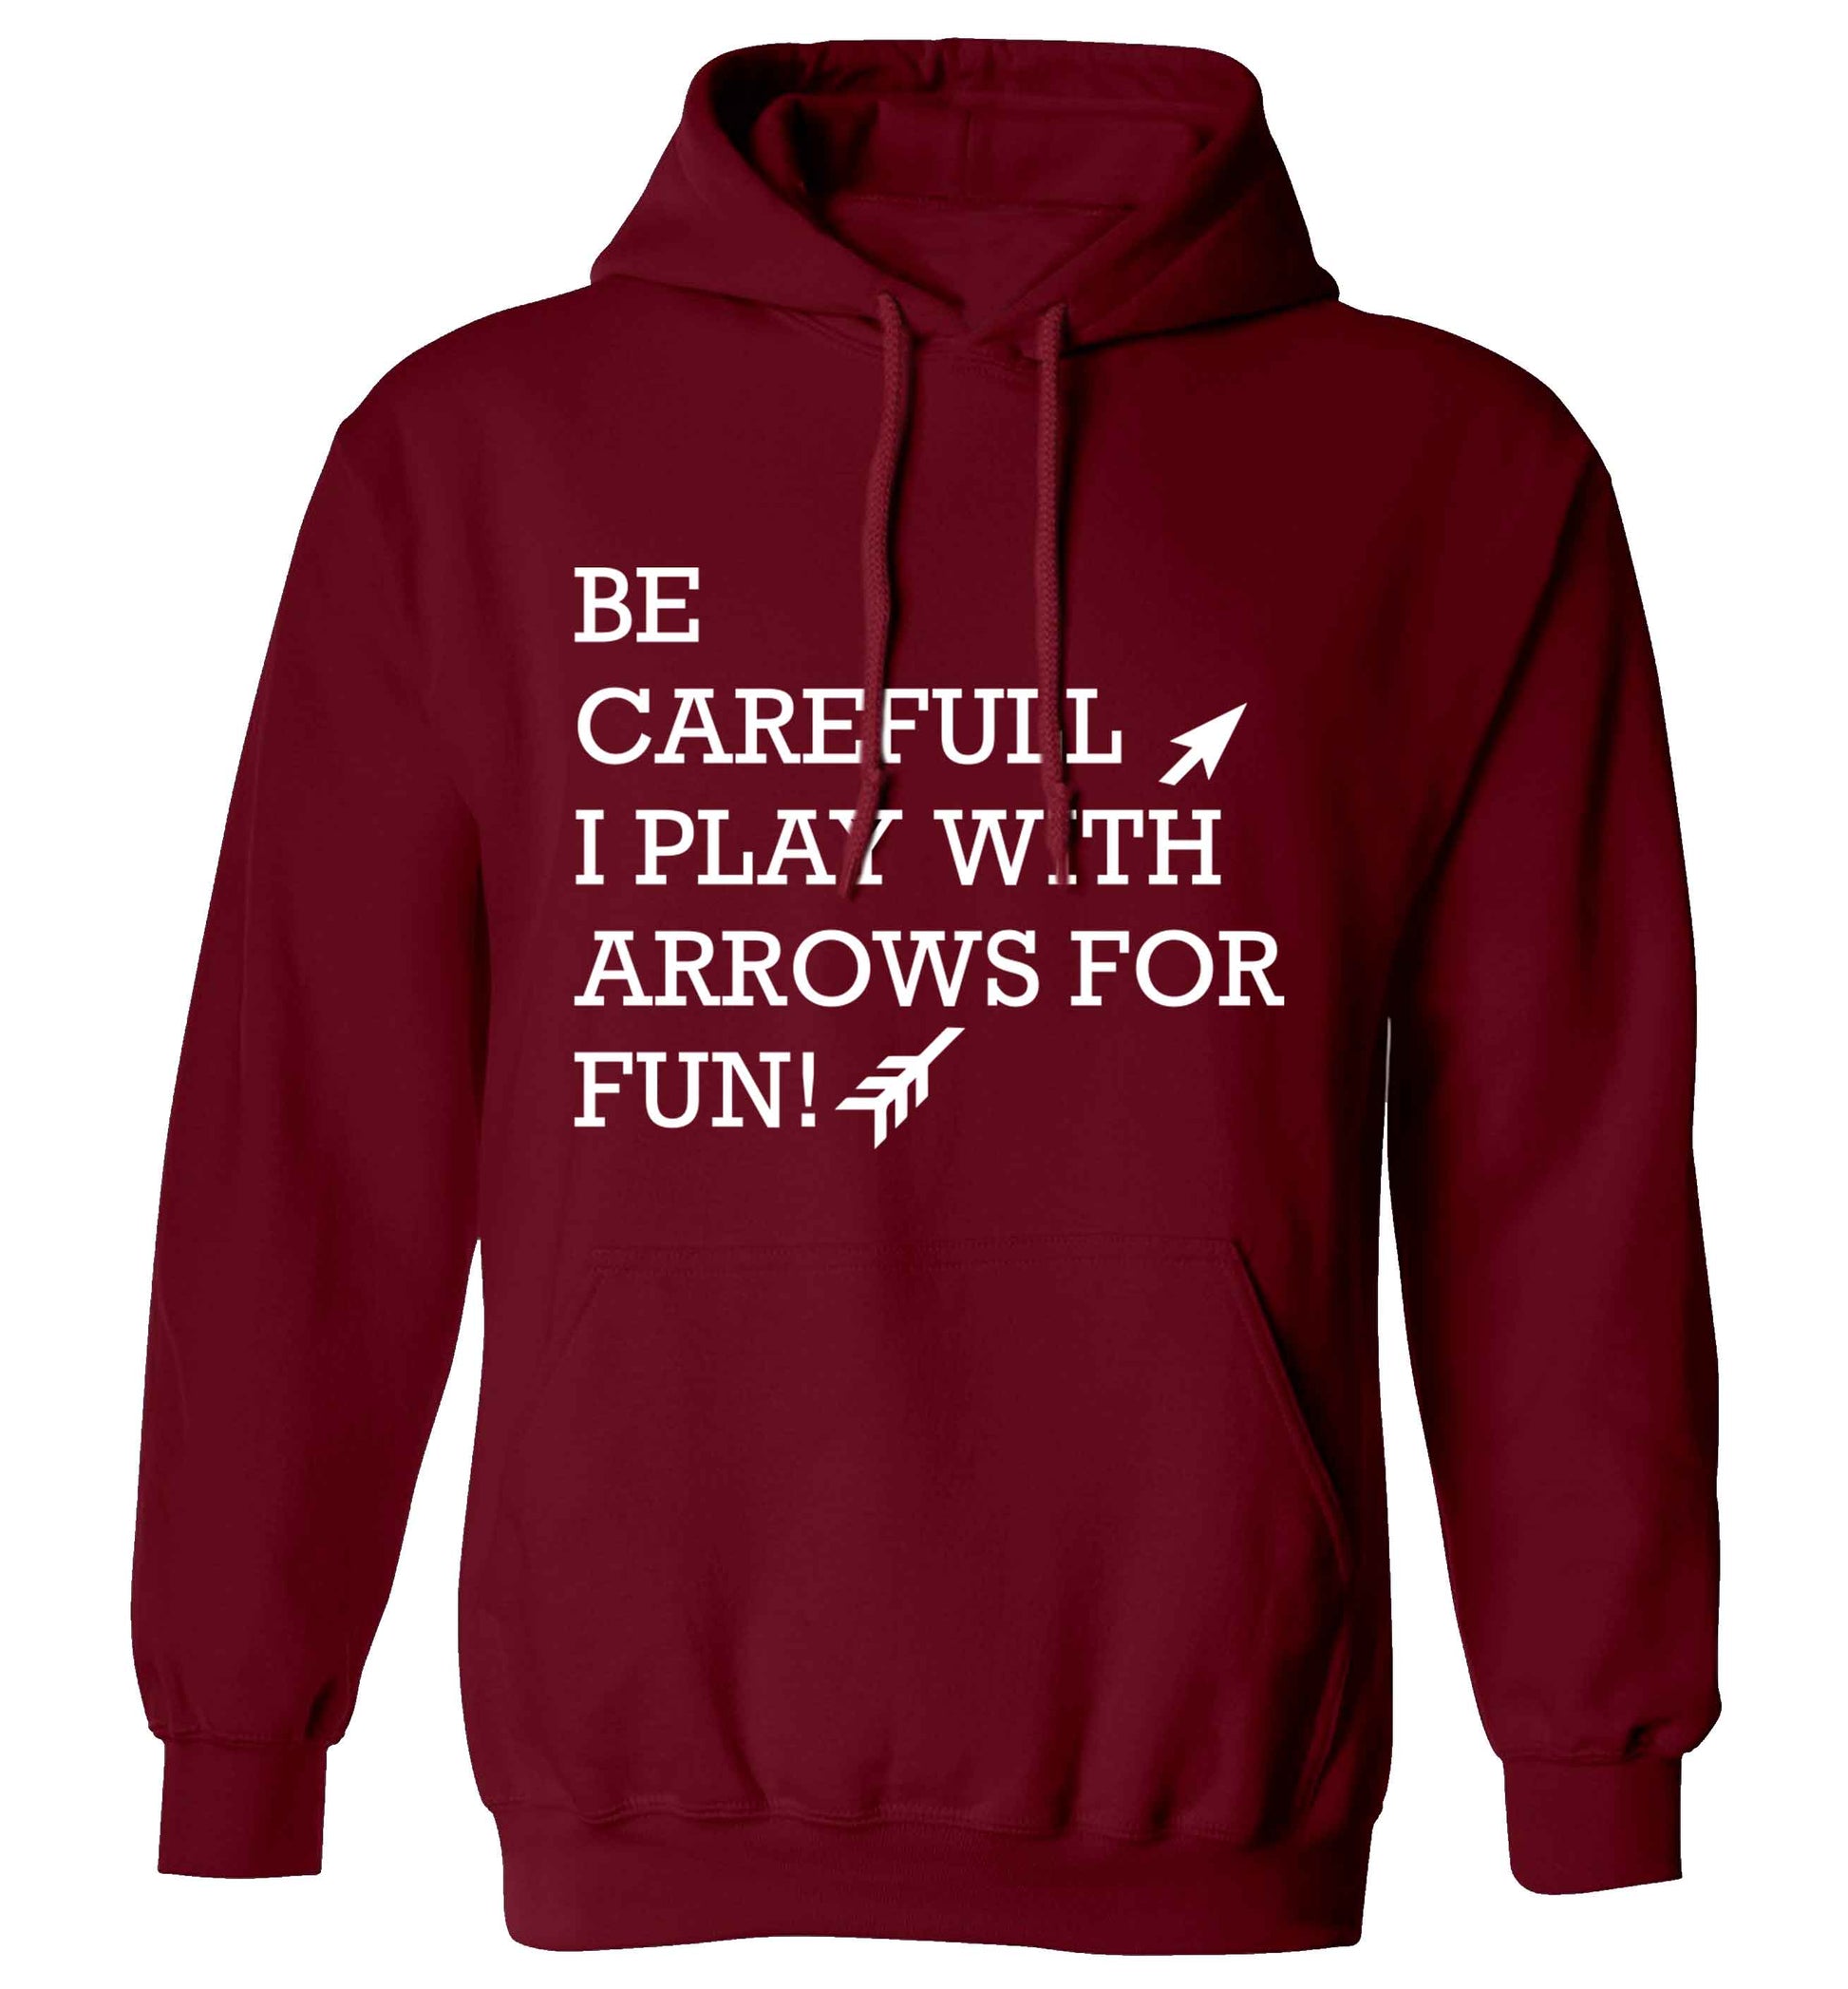 Be carefull I play with arrows for fun adults unisex maroon hoodie 2XL